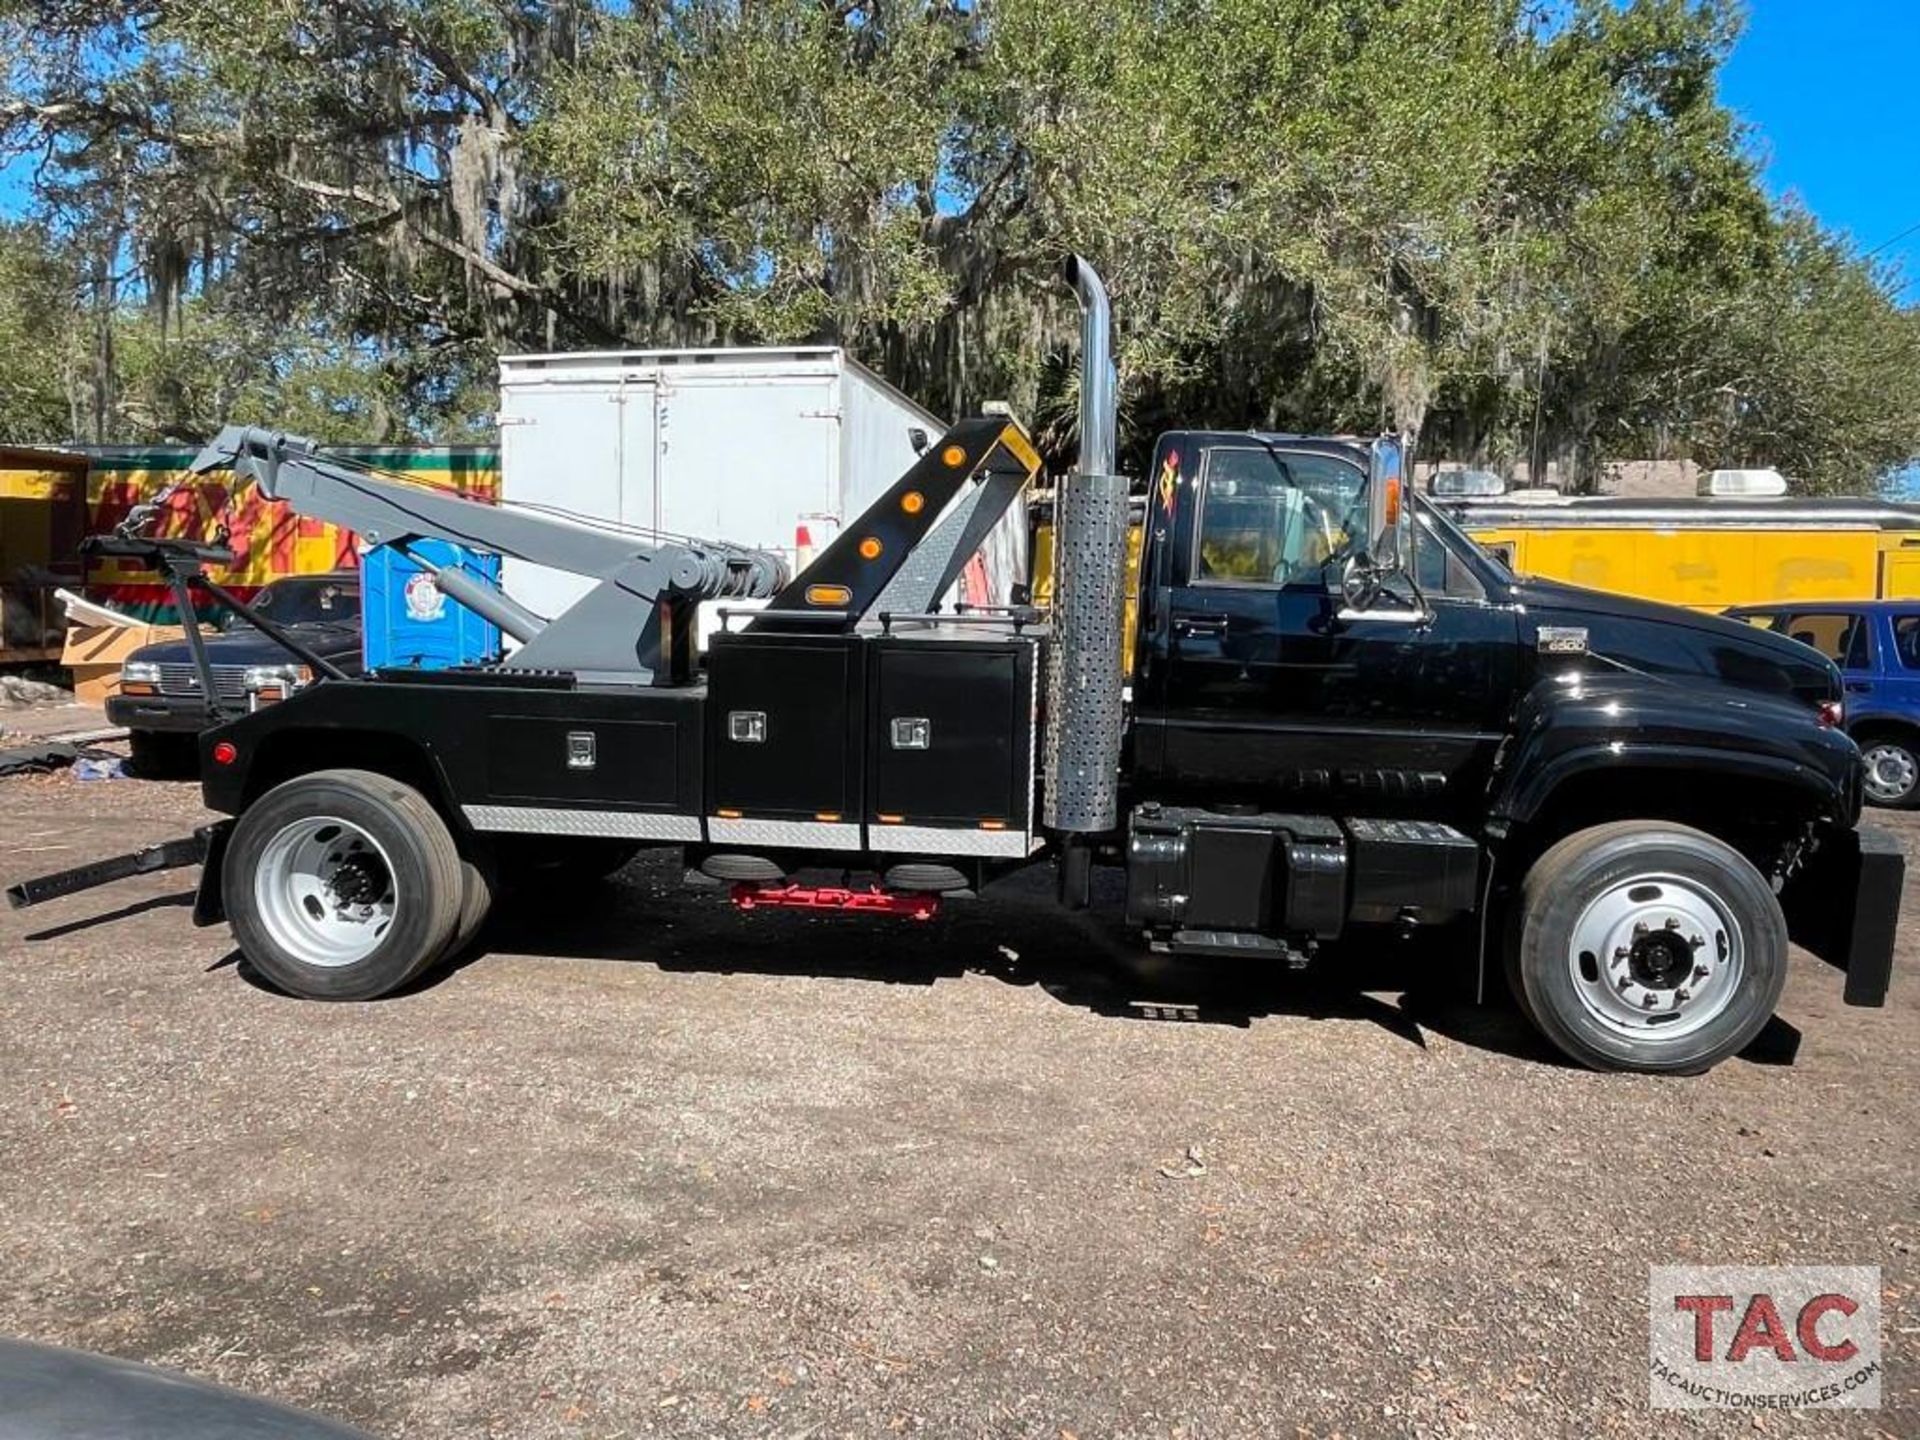 2001 Chevrolet C6500 Tow Truck - Image 4 of 40